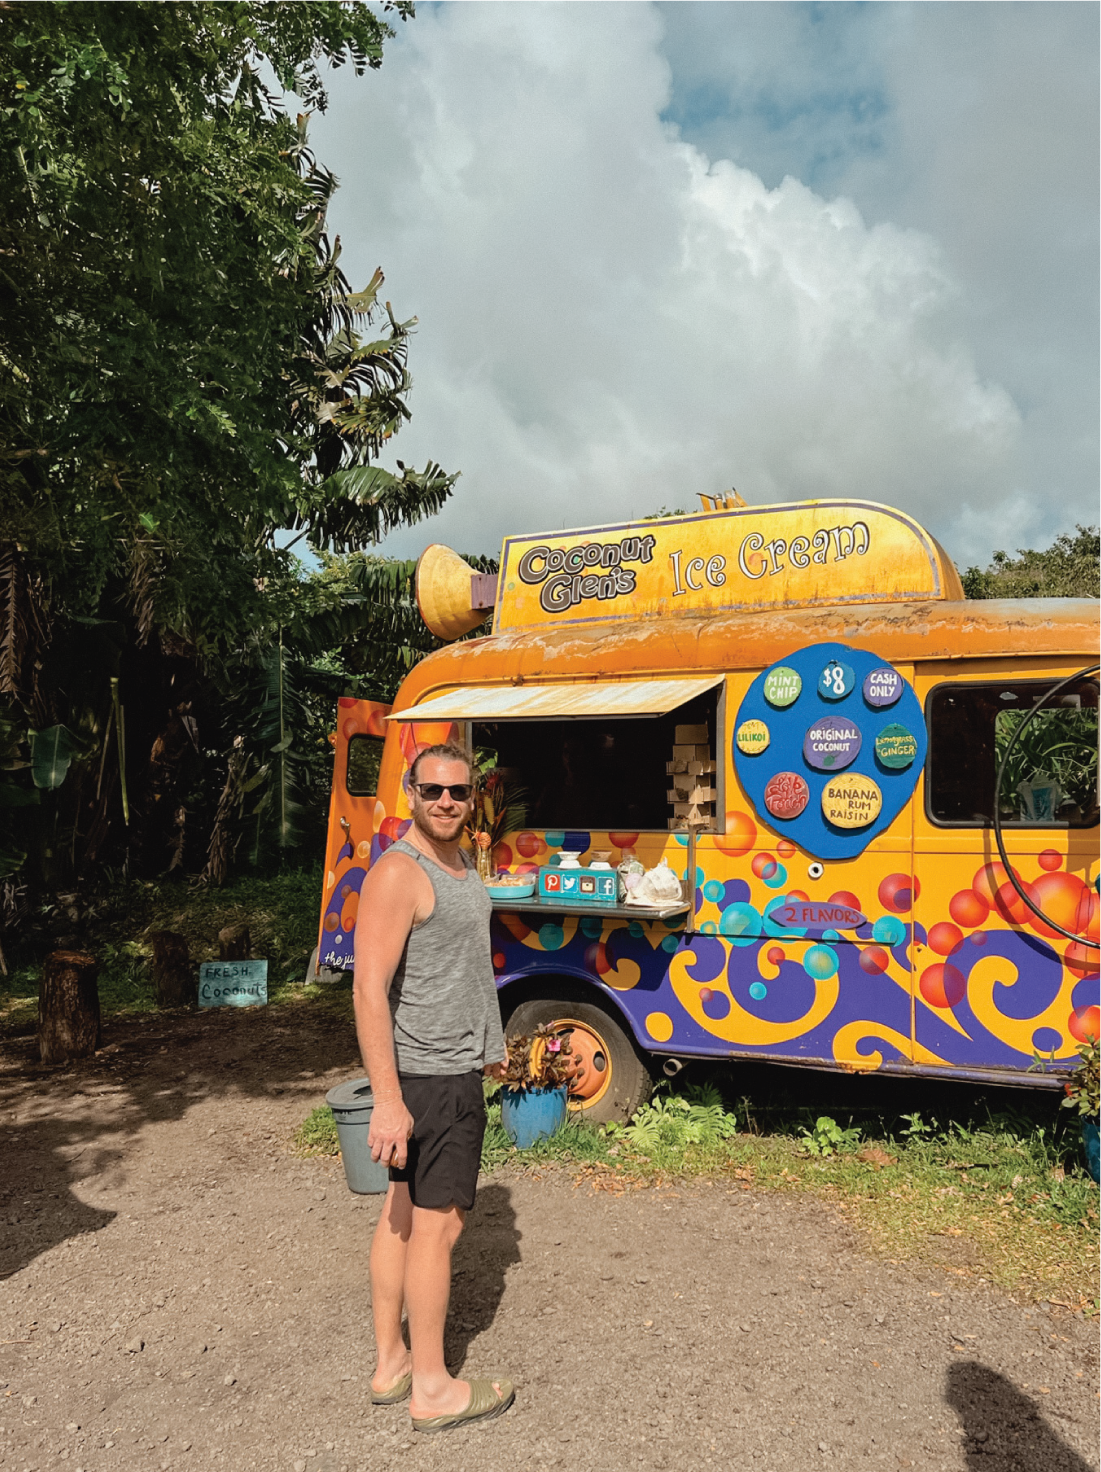 Adam, an owner of Hello Adorn standing in front of the coconut glen's ice cream truck in Maui, Hawaii.